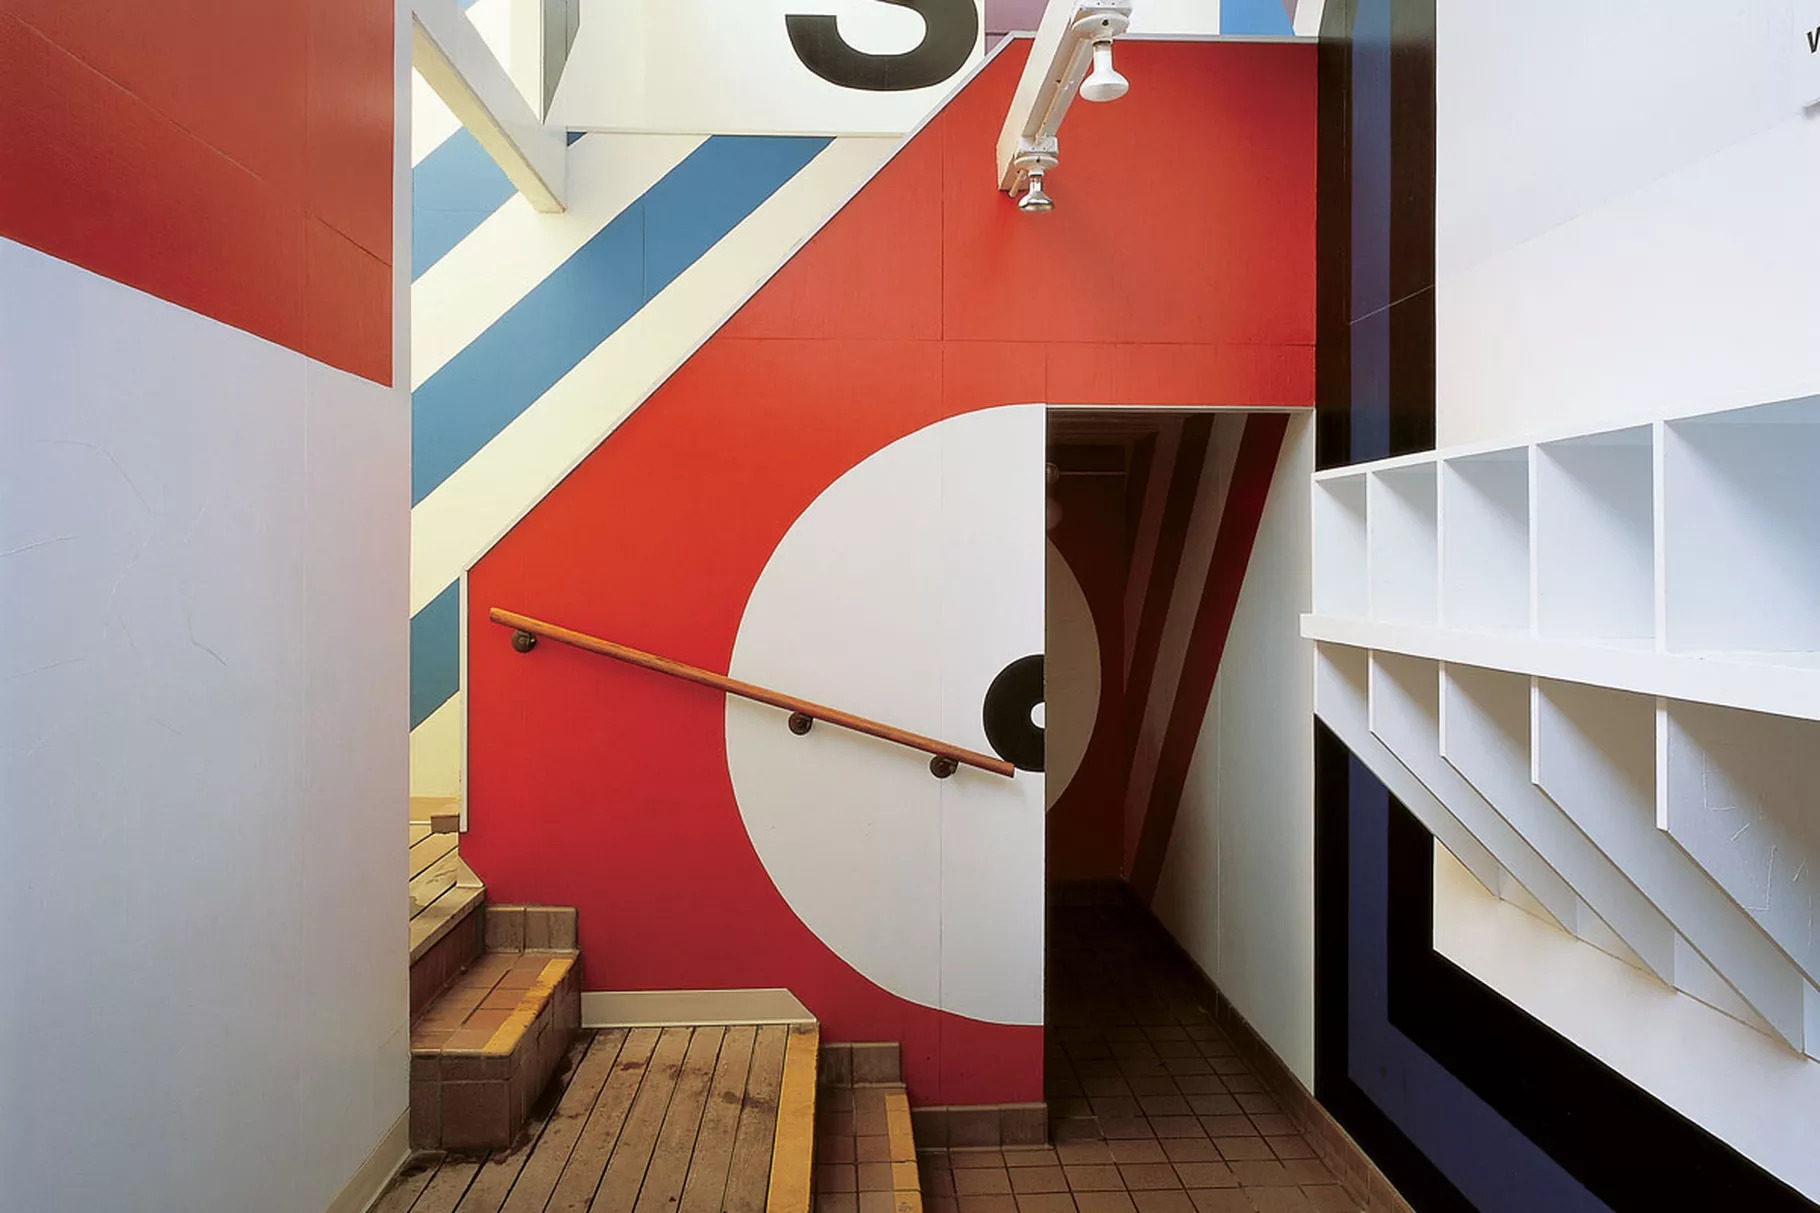 At 91, Barbara Stauffacher Solomon has gained an international following. She spoke to Margareta von Bartha about pyjamas, bold typography, and finding her voice as a woman